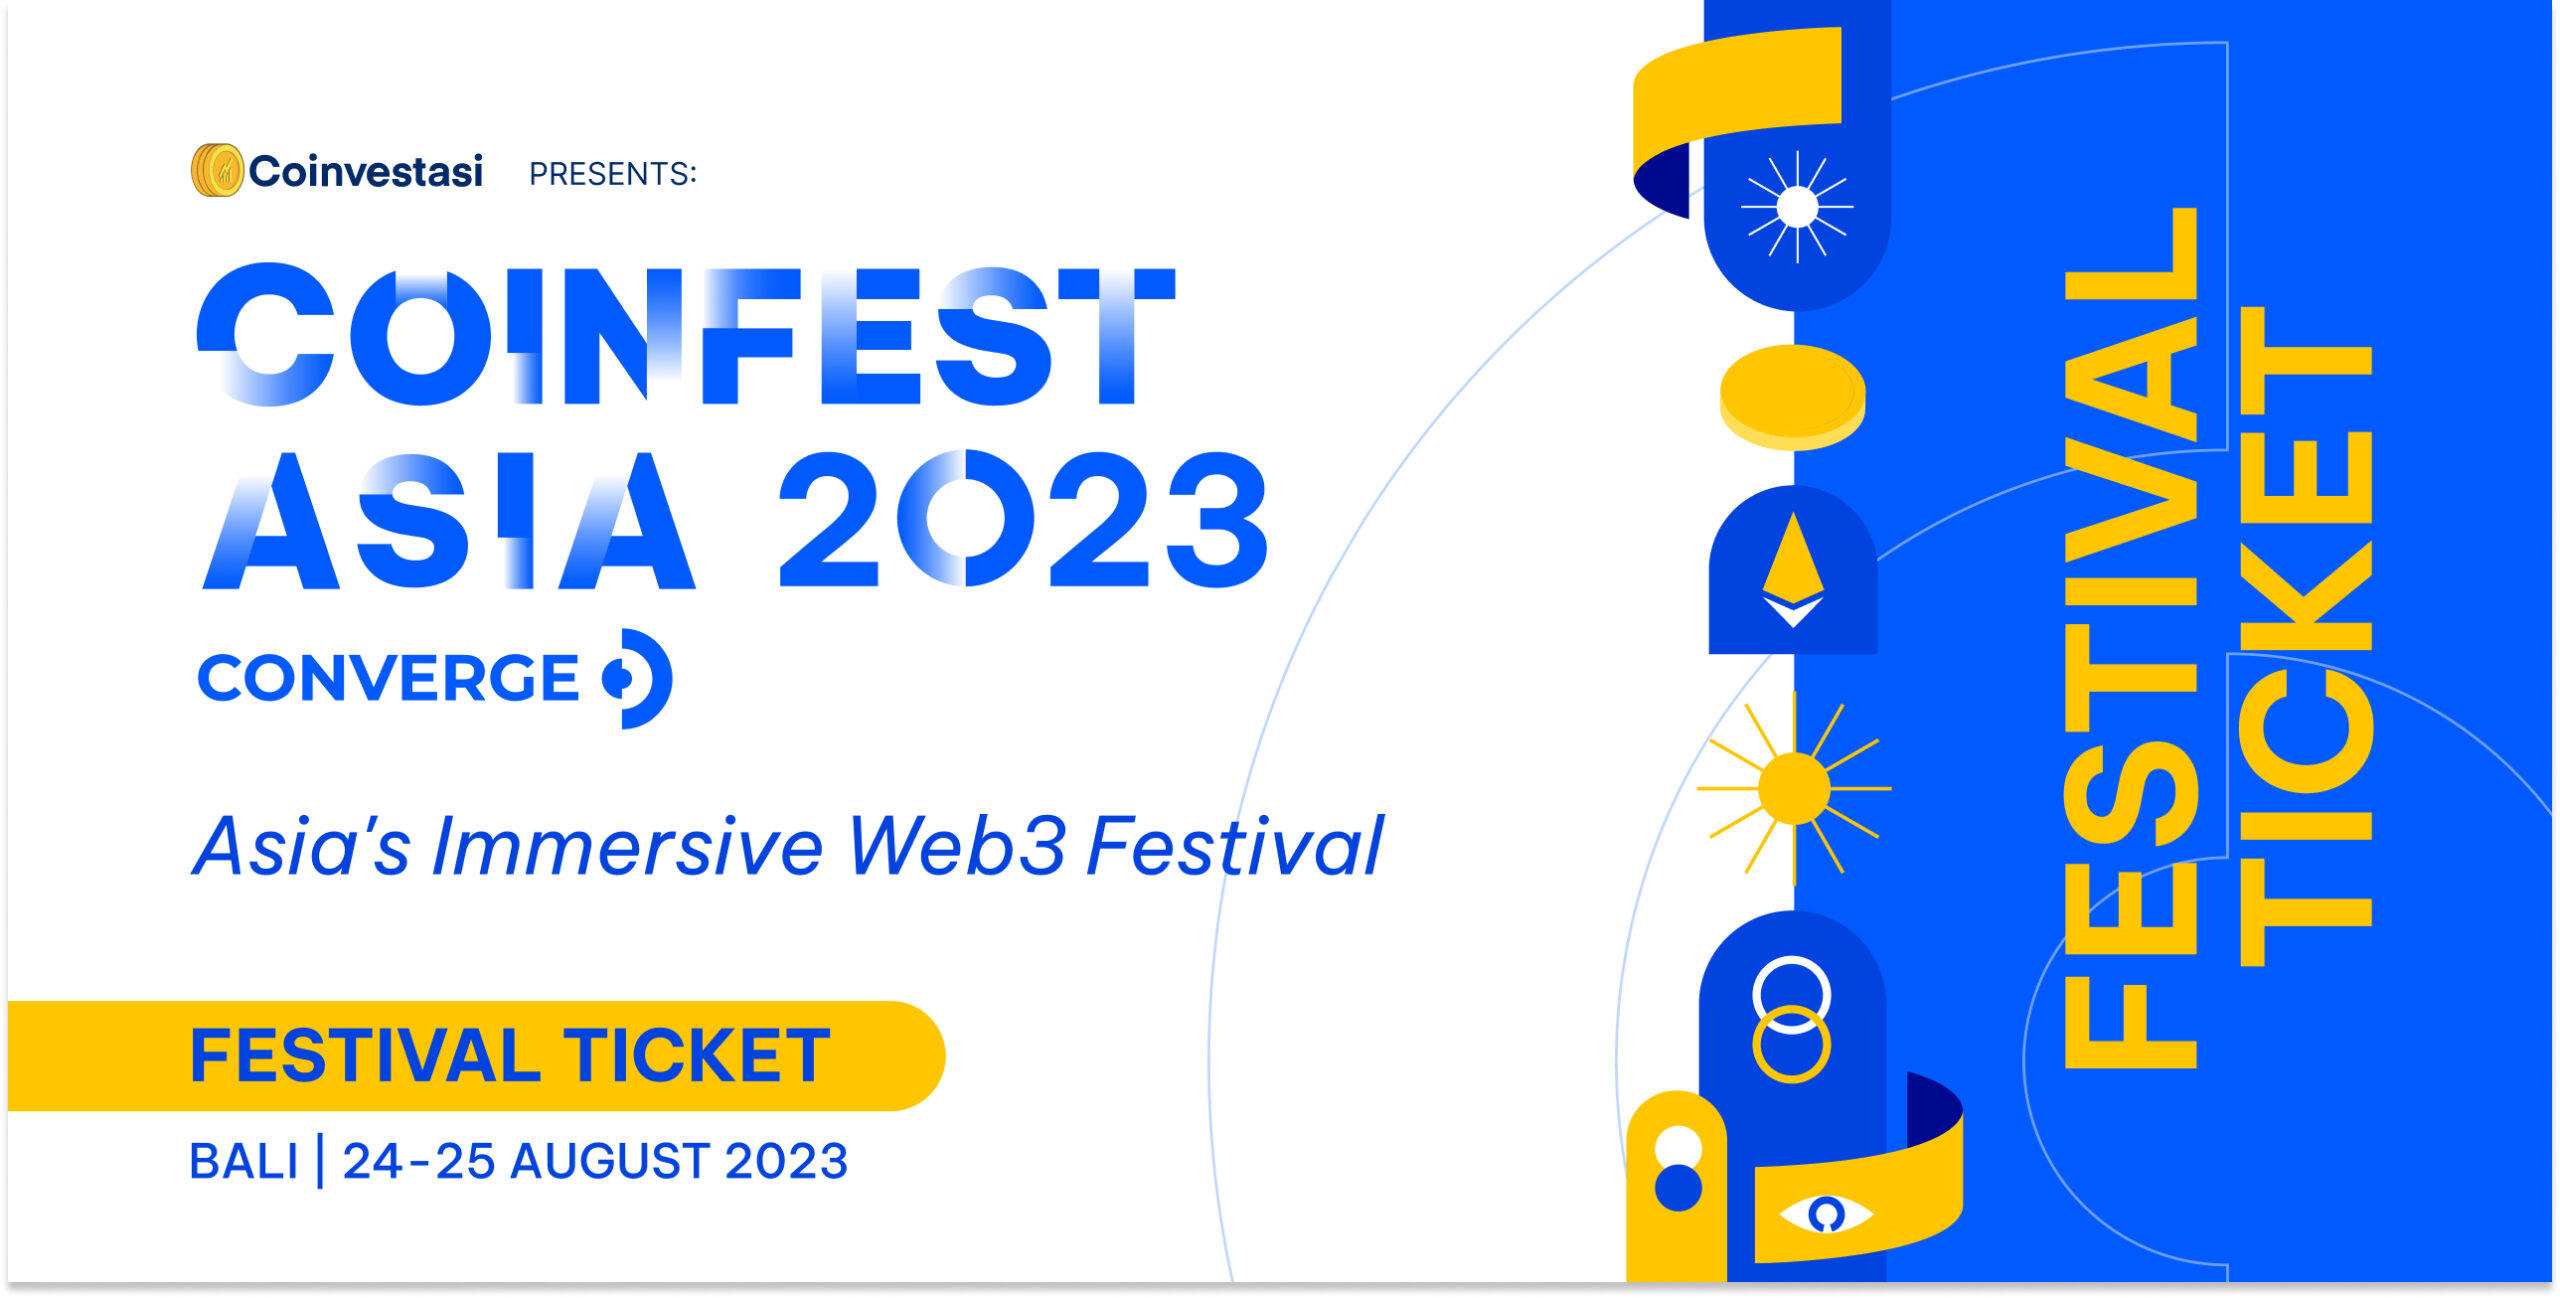 Coinfest Asia (Festival Ticket Ticket)